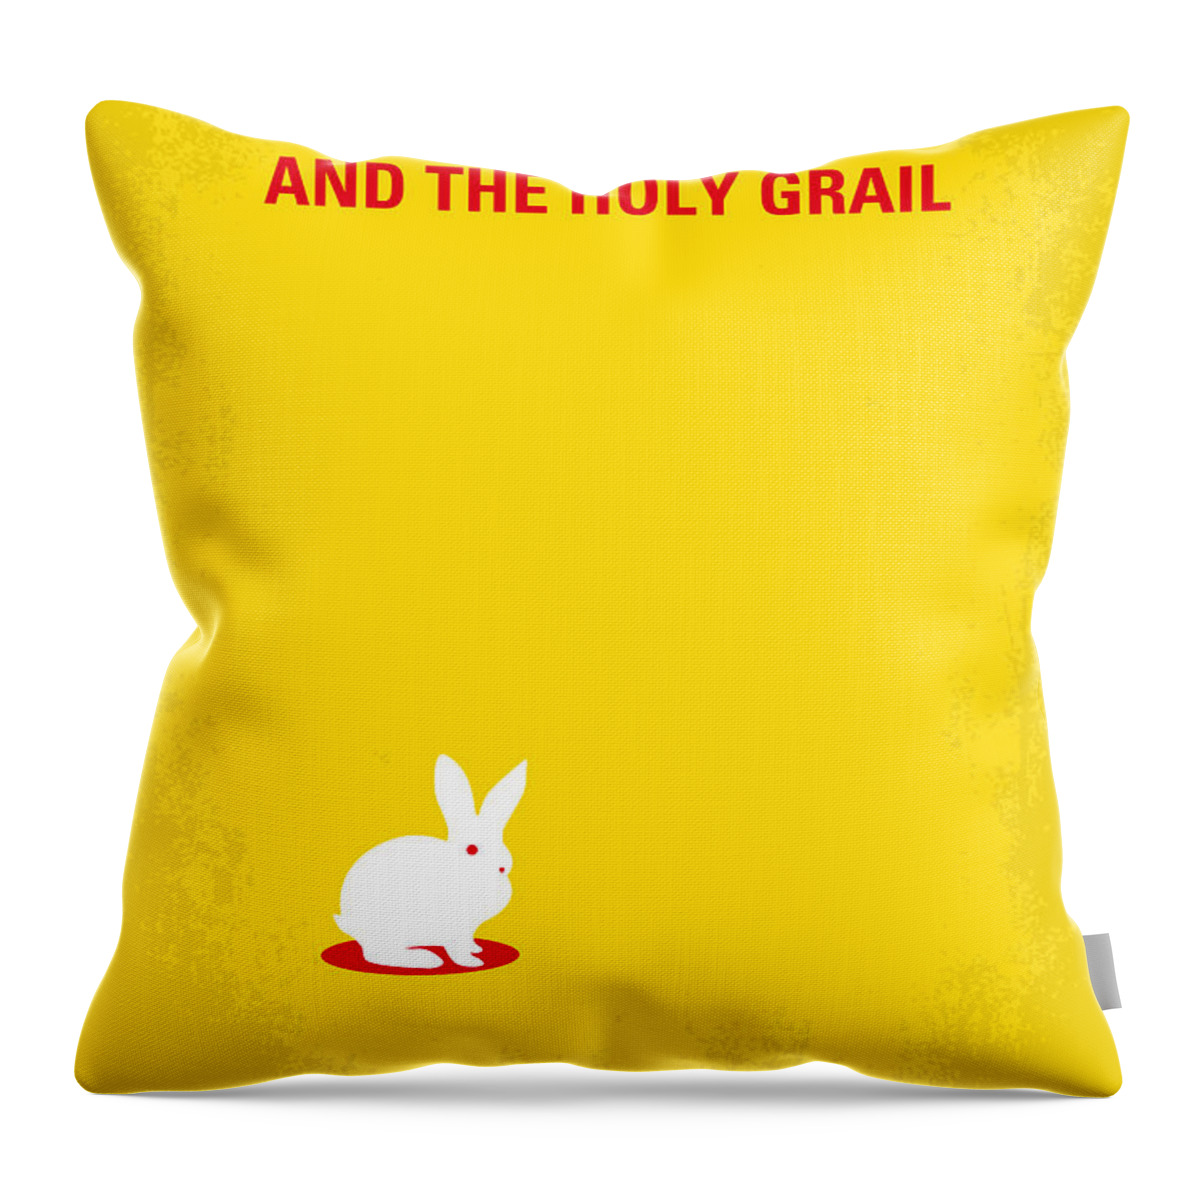 Monty Python And The Holy Grail Throw Pillow featuring the digital art No036 My Monty Python And The Holy Grail minimal movie poster by Chungkong Art